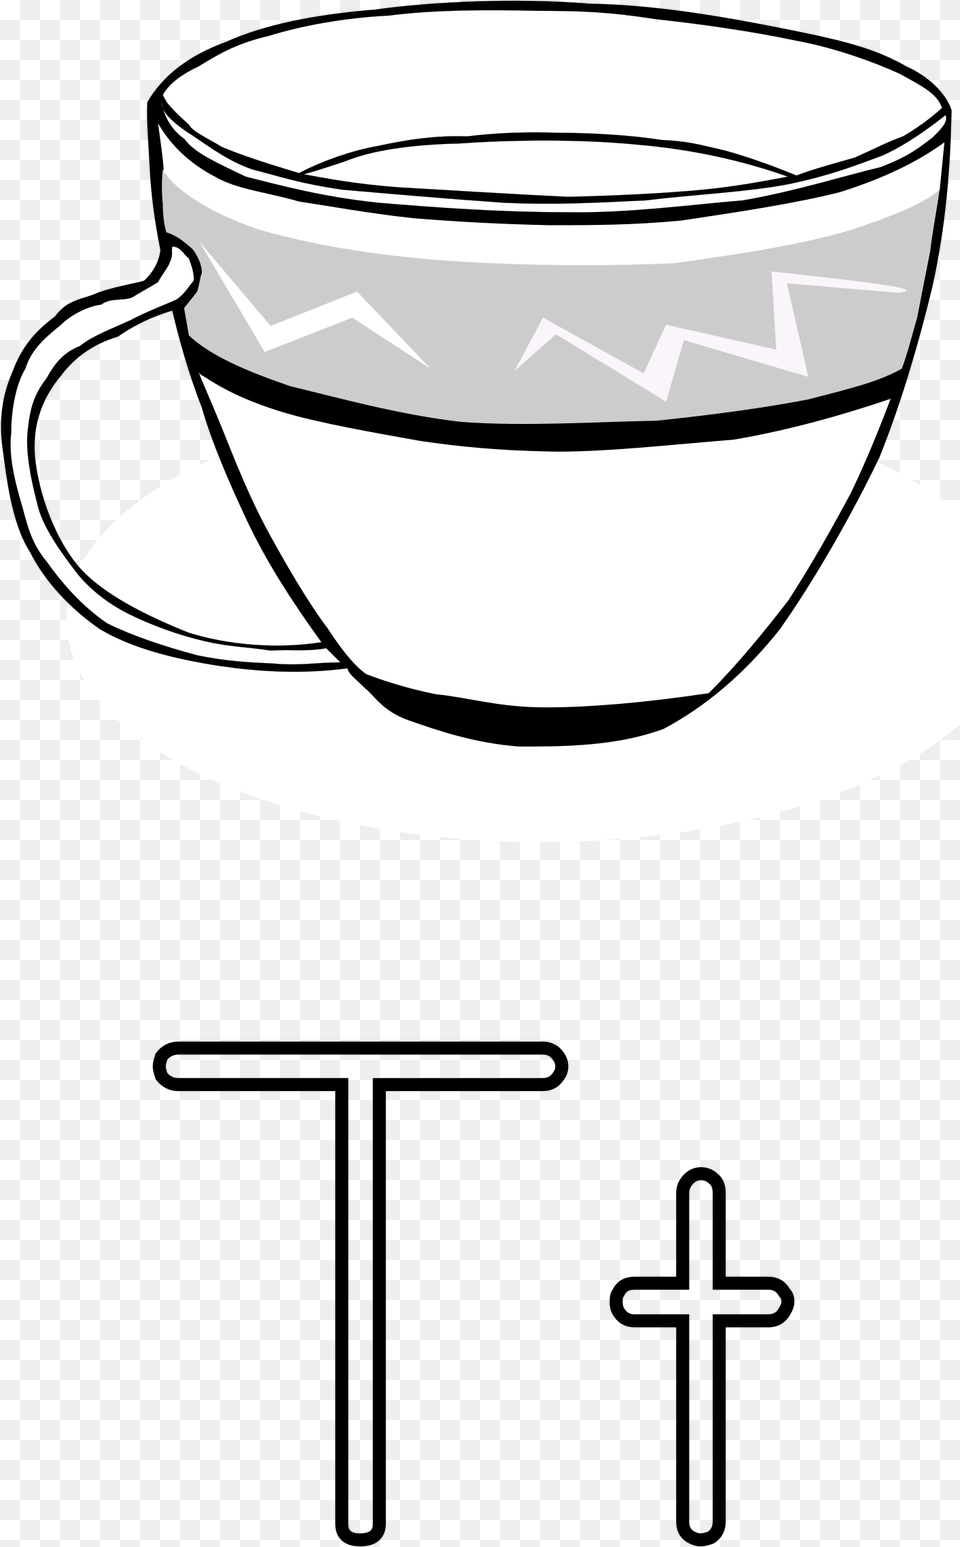 This Icons Design Of Letra T De Taza, Saucer, Cup Free Transparent Png